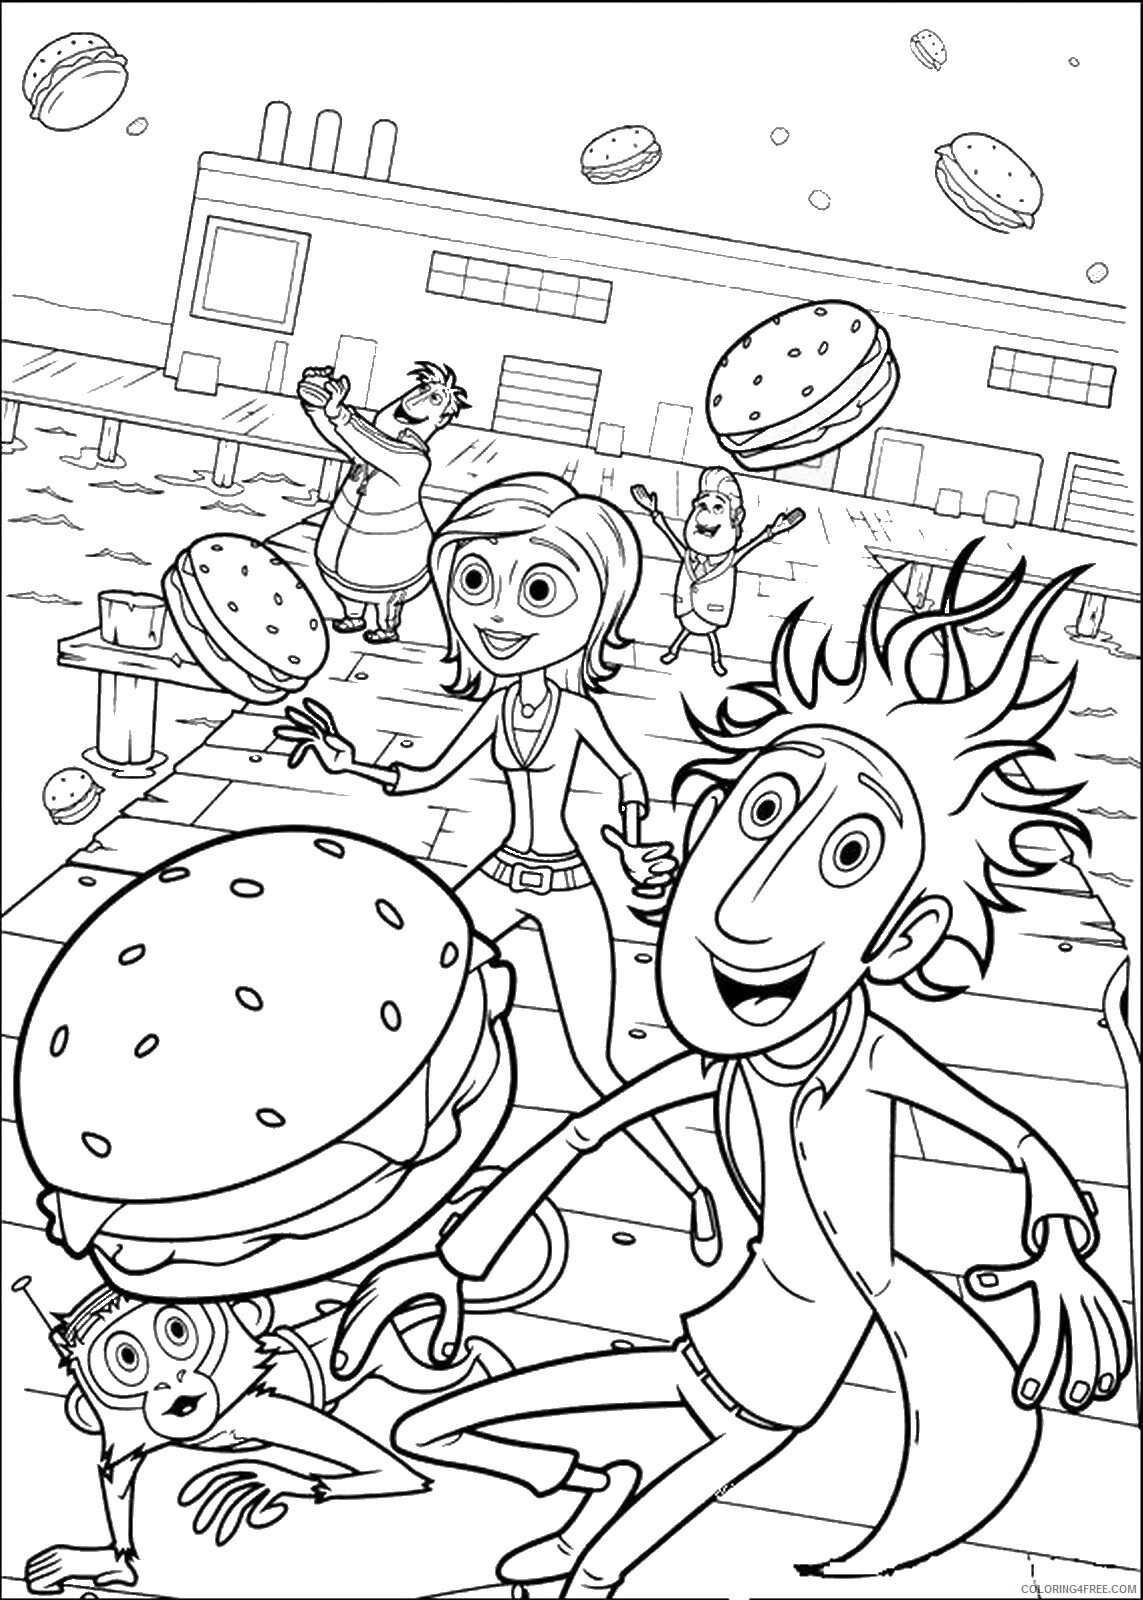 Cloudy with a Chance of Meatballs Coloring Pages TV Film Printable 2020 02226 Coloring4free